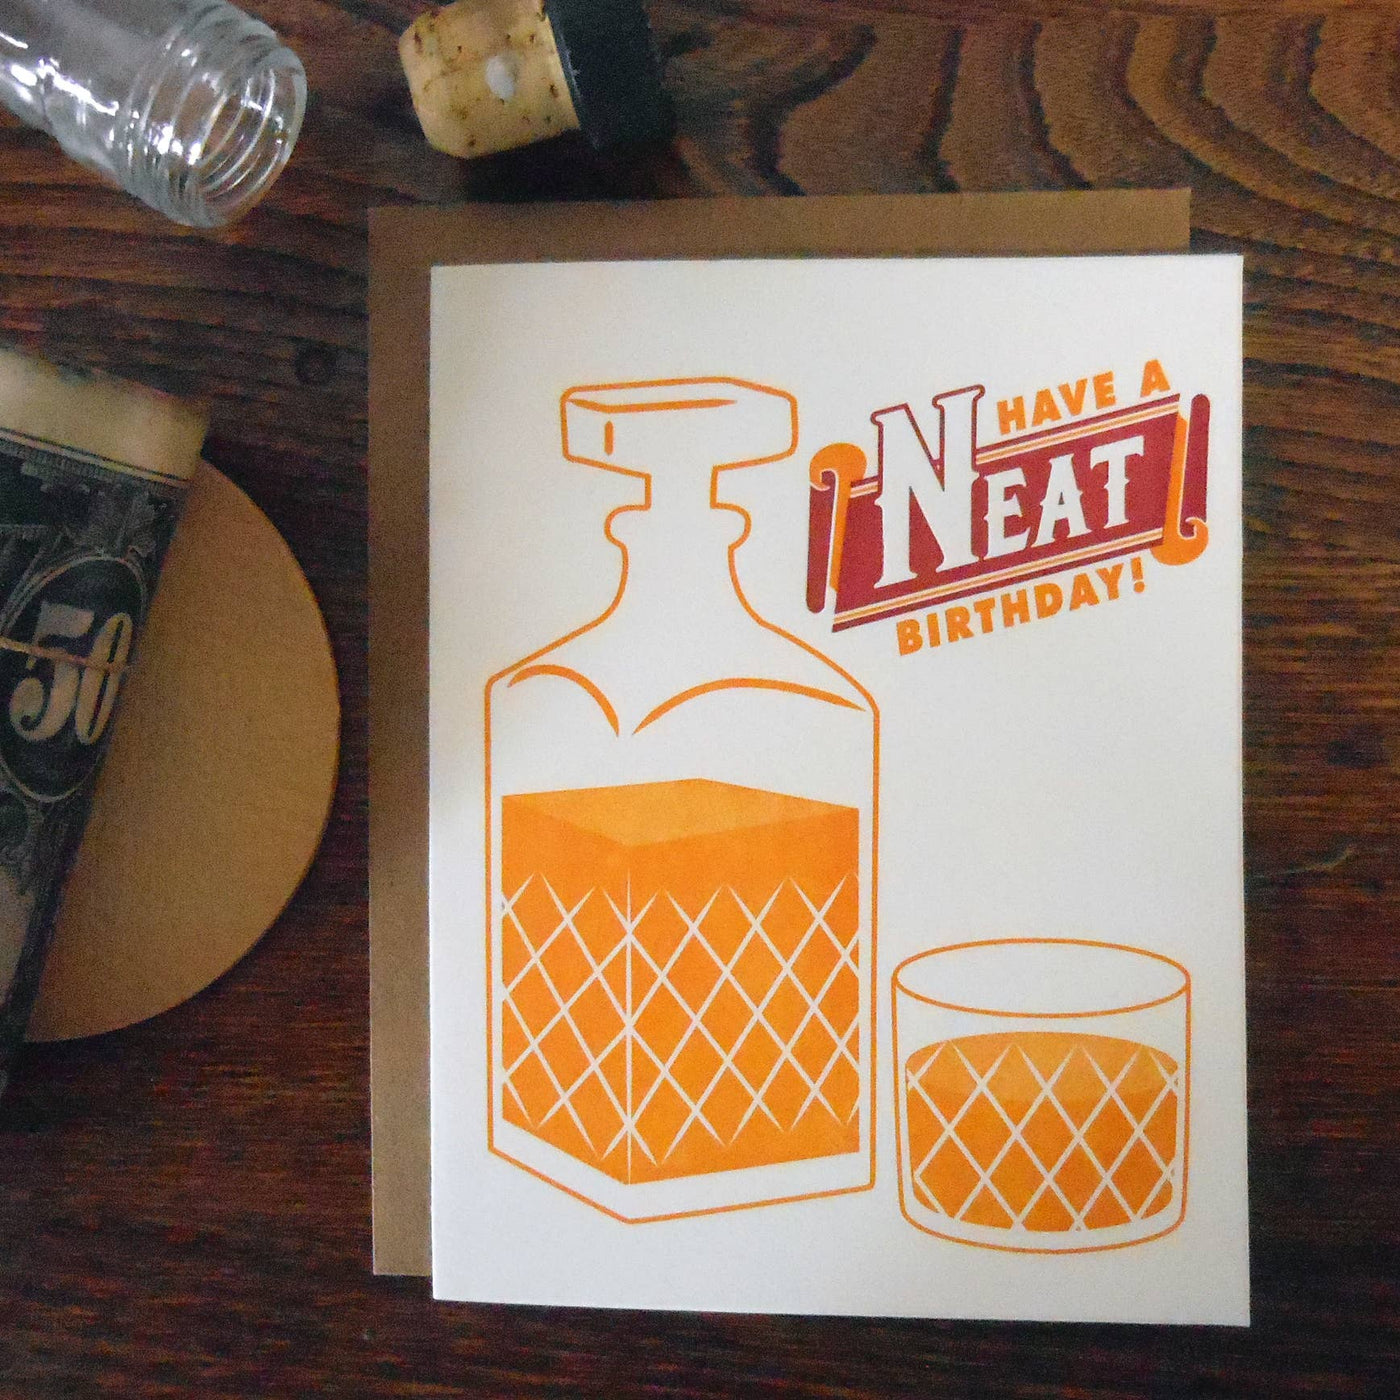 Have a Neat Birthday Card